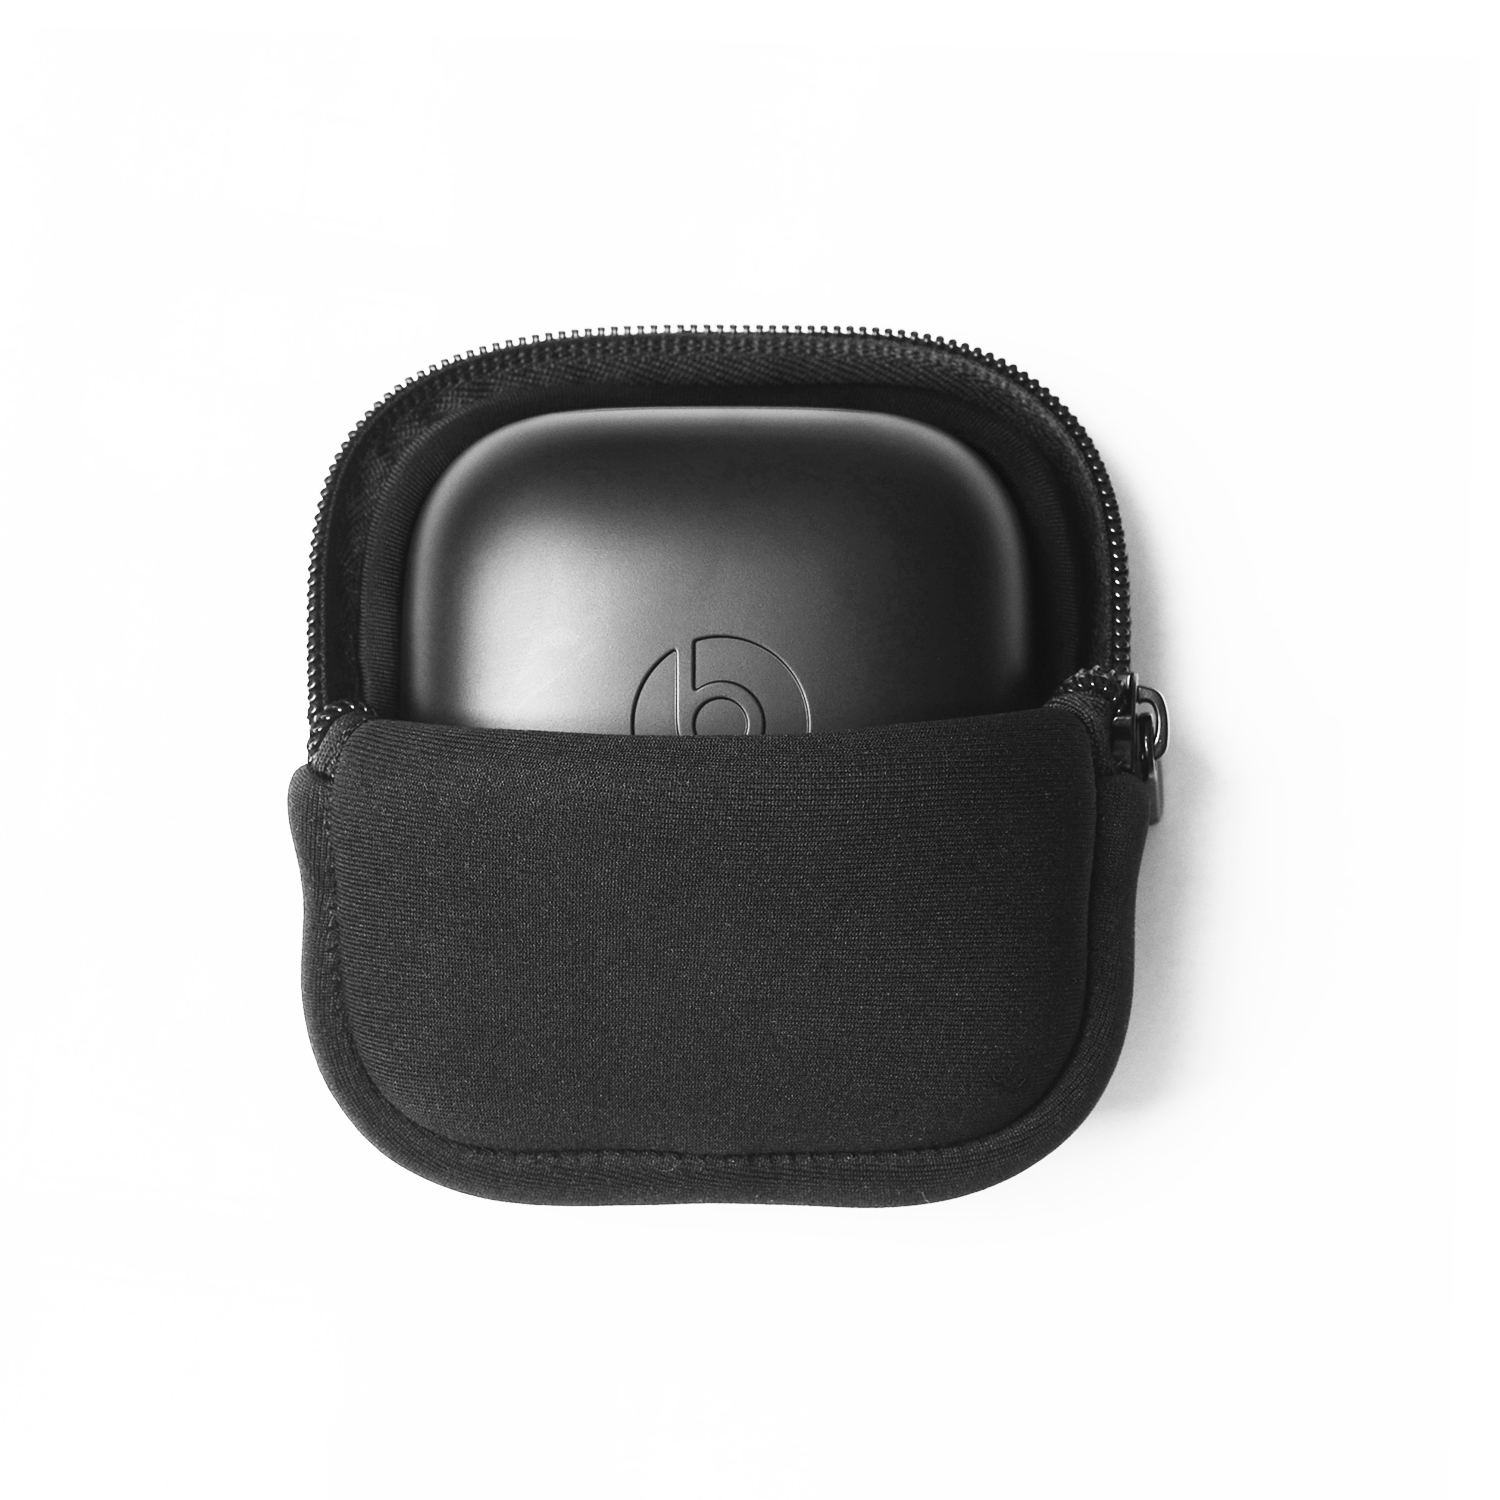 Bakeey-Earphone-Storage-Bag-Wireless-bluetooth-Headset-Protective-Carrying-Case-Dustproof-Portable-S-1800555-3